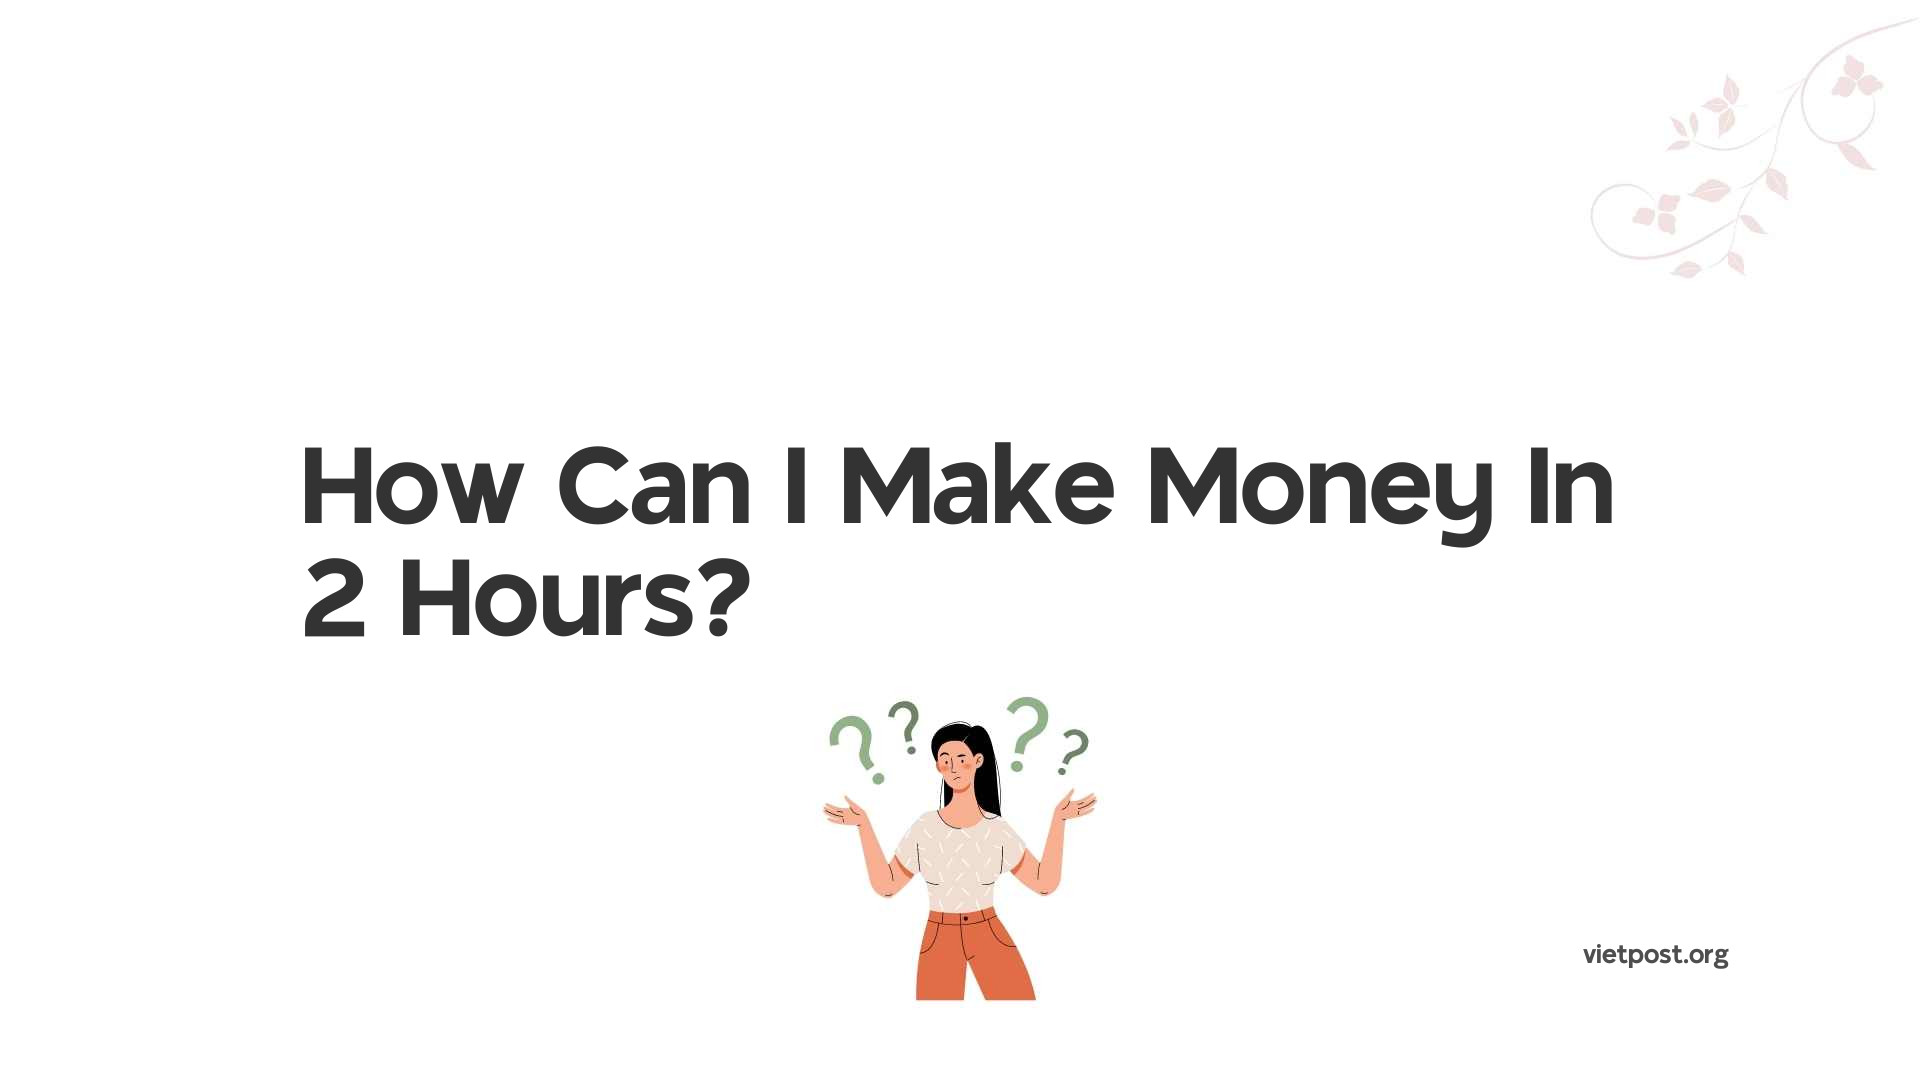 How Can I Make Money In 2 Hours?